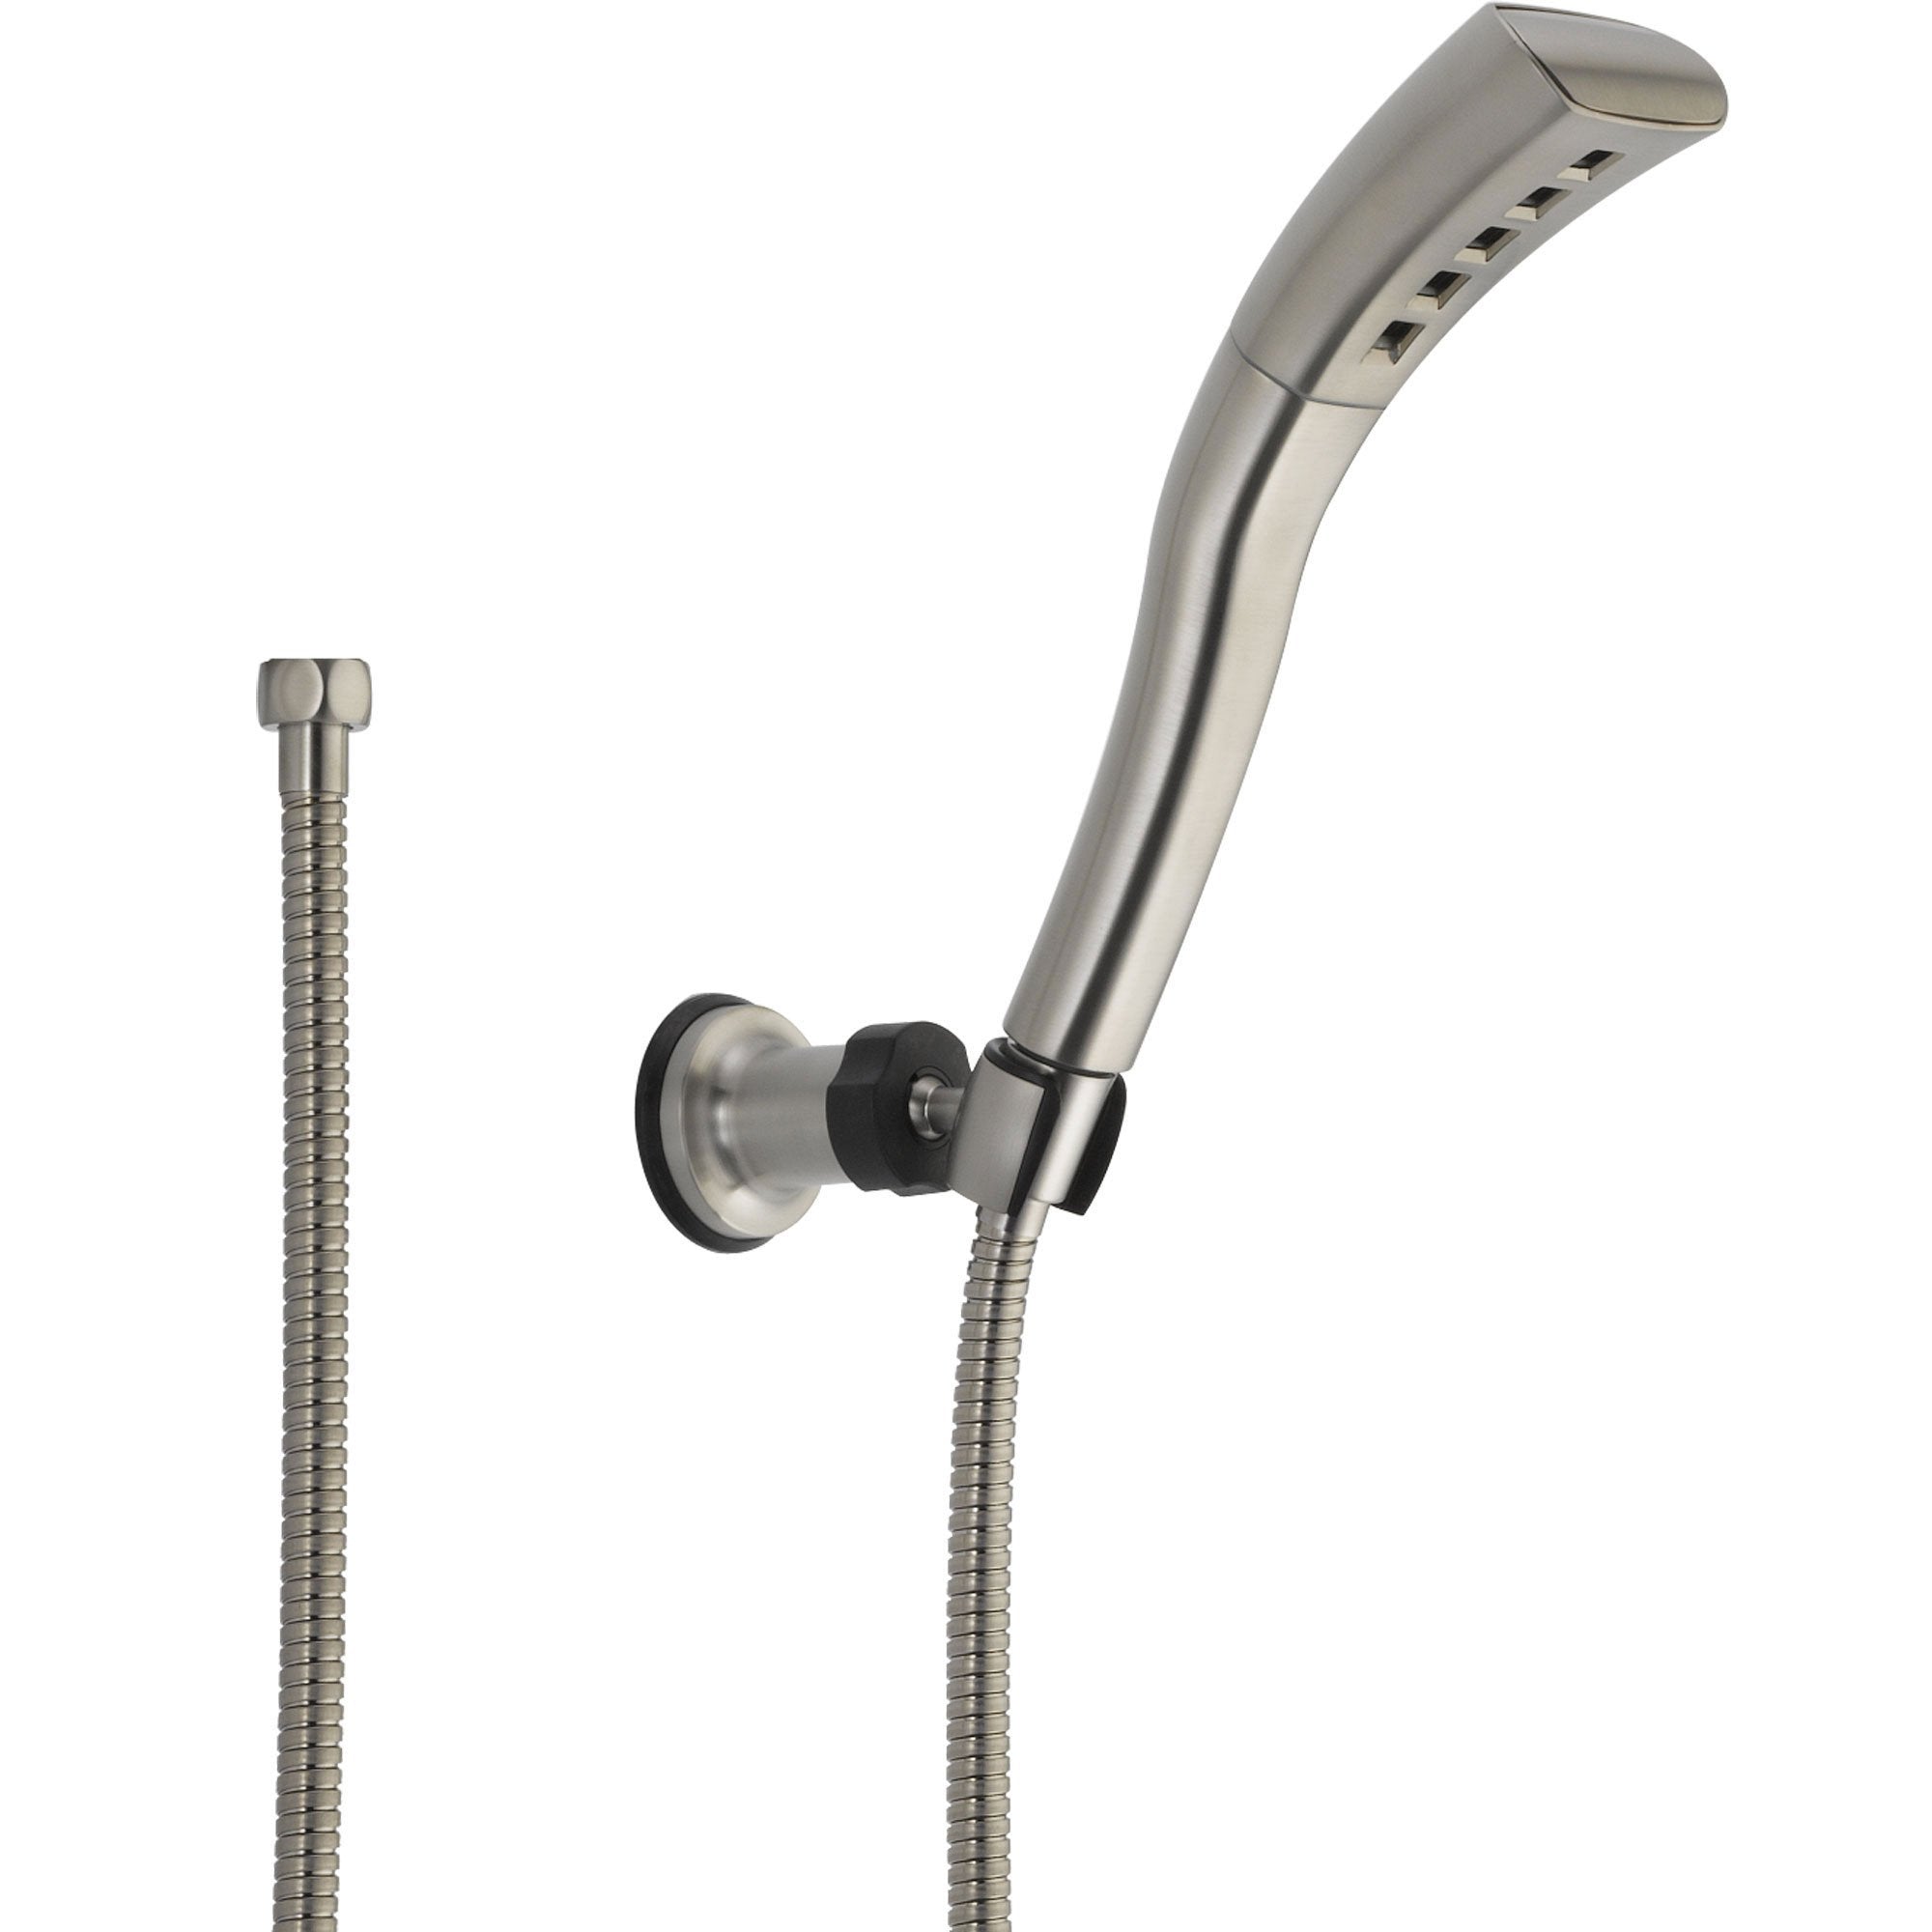 Delta Modern Wall Mount Stainless Steel Finish Handheld Shower Faucet 604247